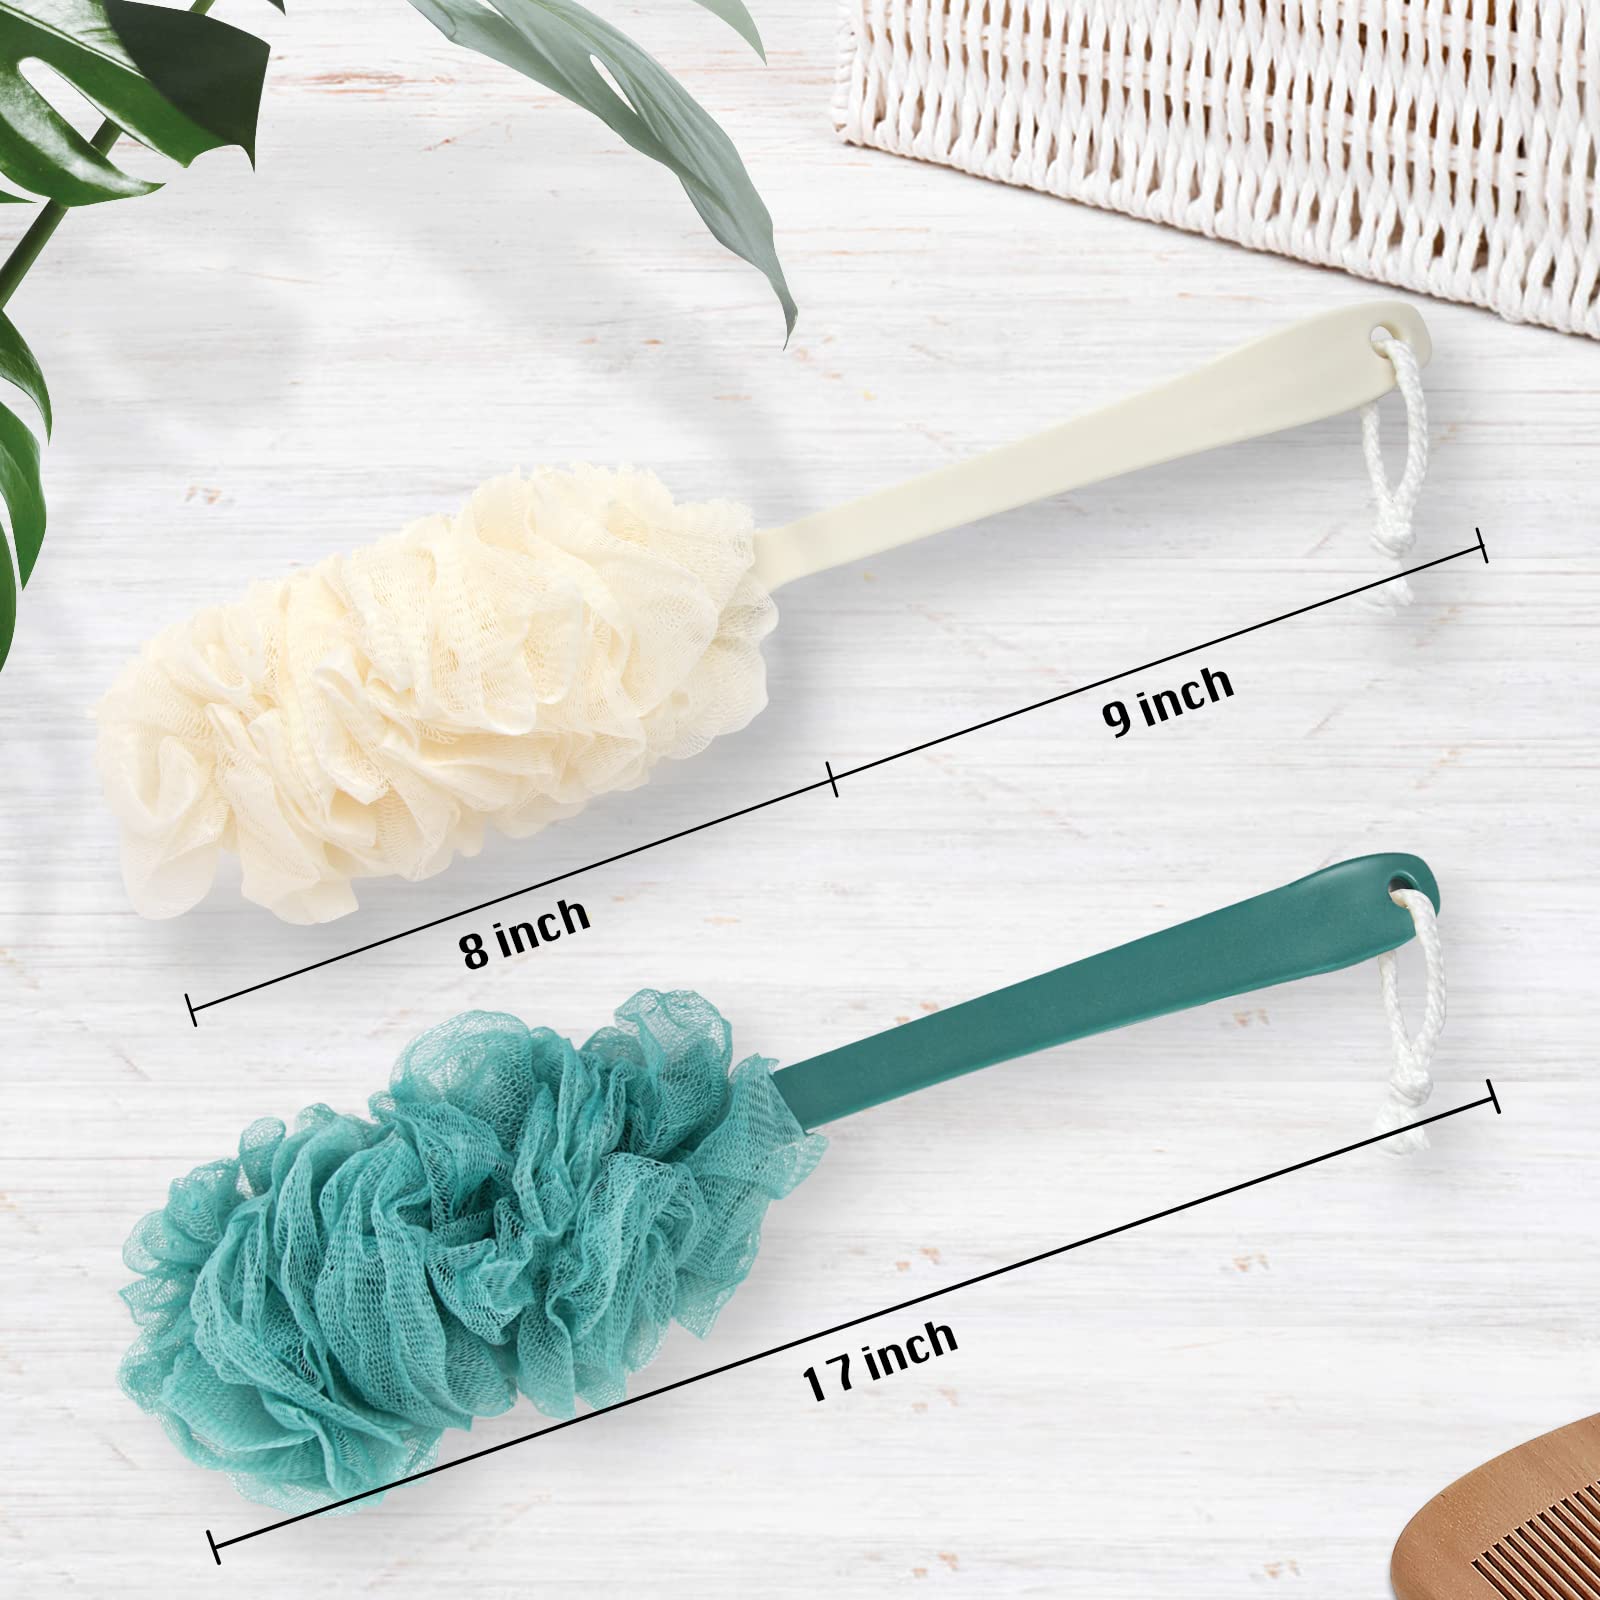 2Pack Back Scrubber for Shower，PIPUHA Loofah Sponge Shower Brush Using Body Exfoliating with Long Handle, Loofah on a Stick for Men Women, Bathing Accessories for Body Brushes (Blue and White)